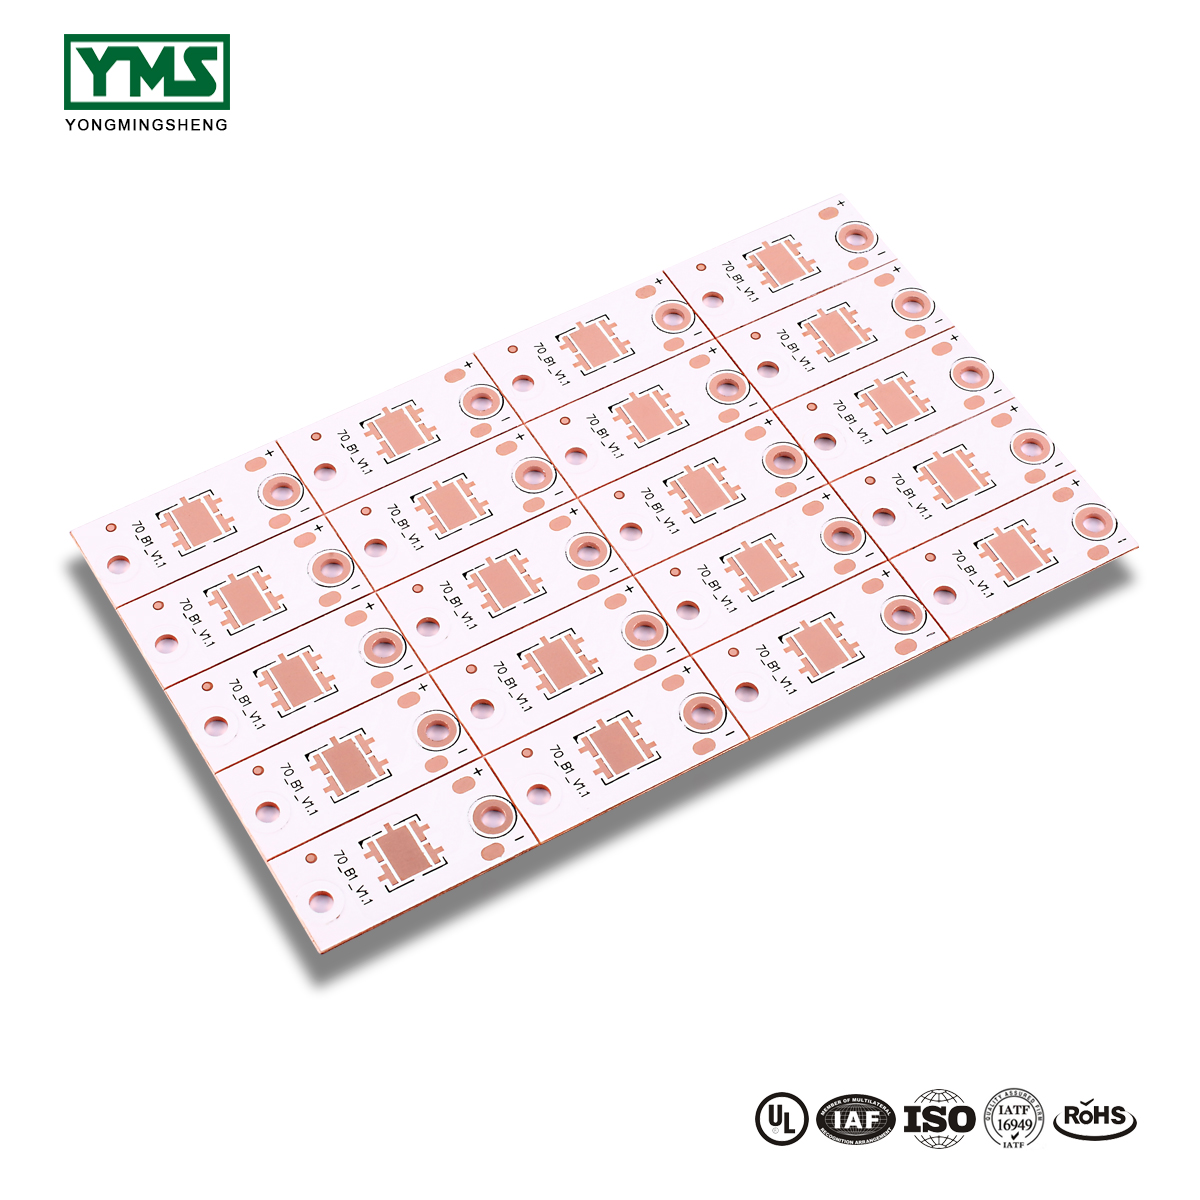 Cheap price High-Layer Pcb - 1Layer Thermoelectric Copper base Board | YMSPCB – Yongmingsheng